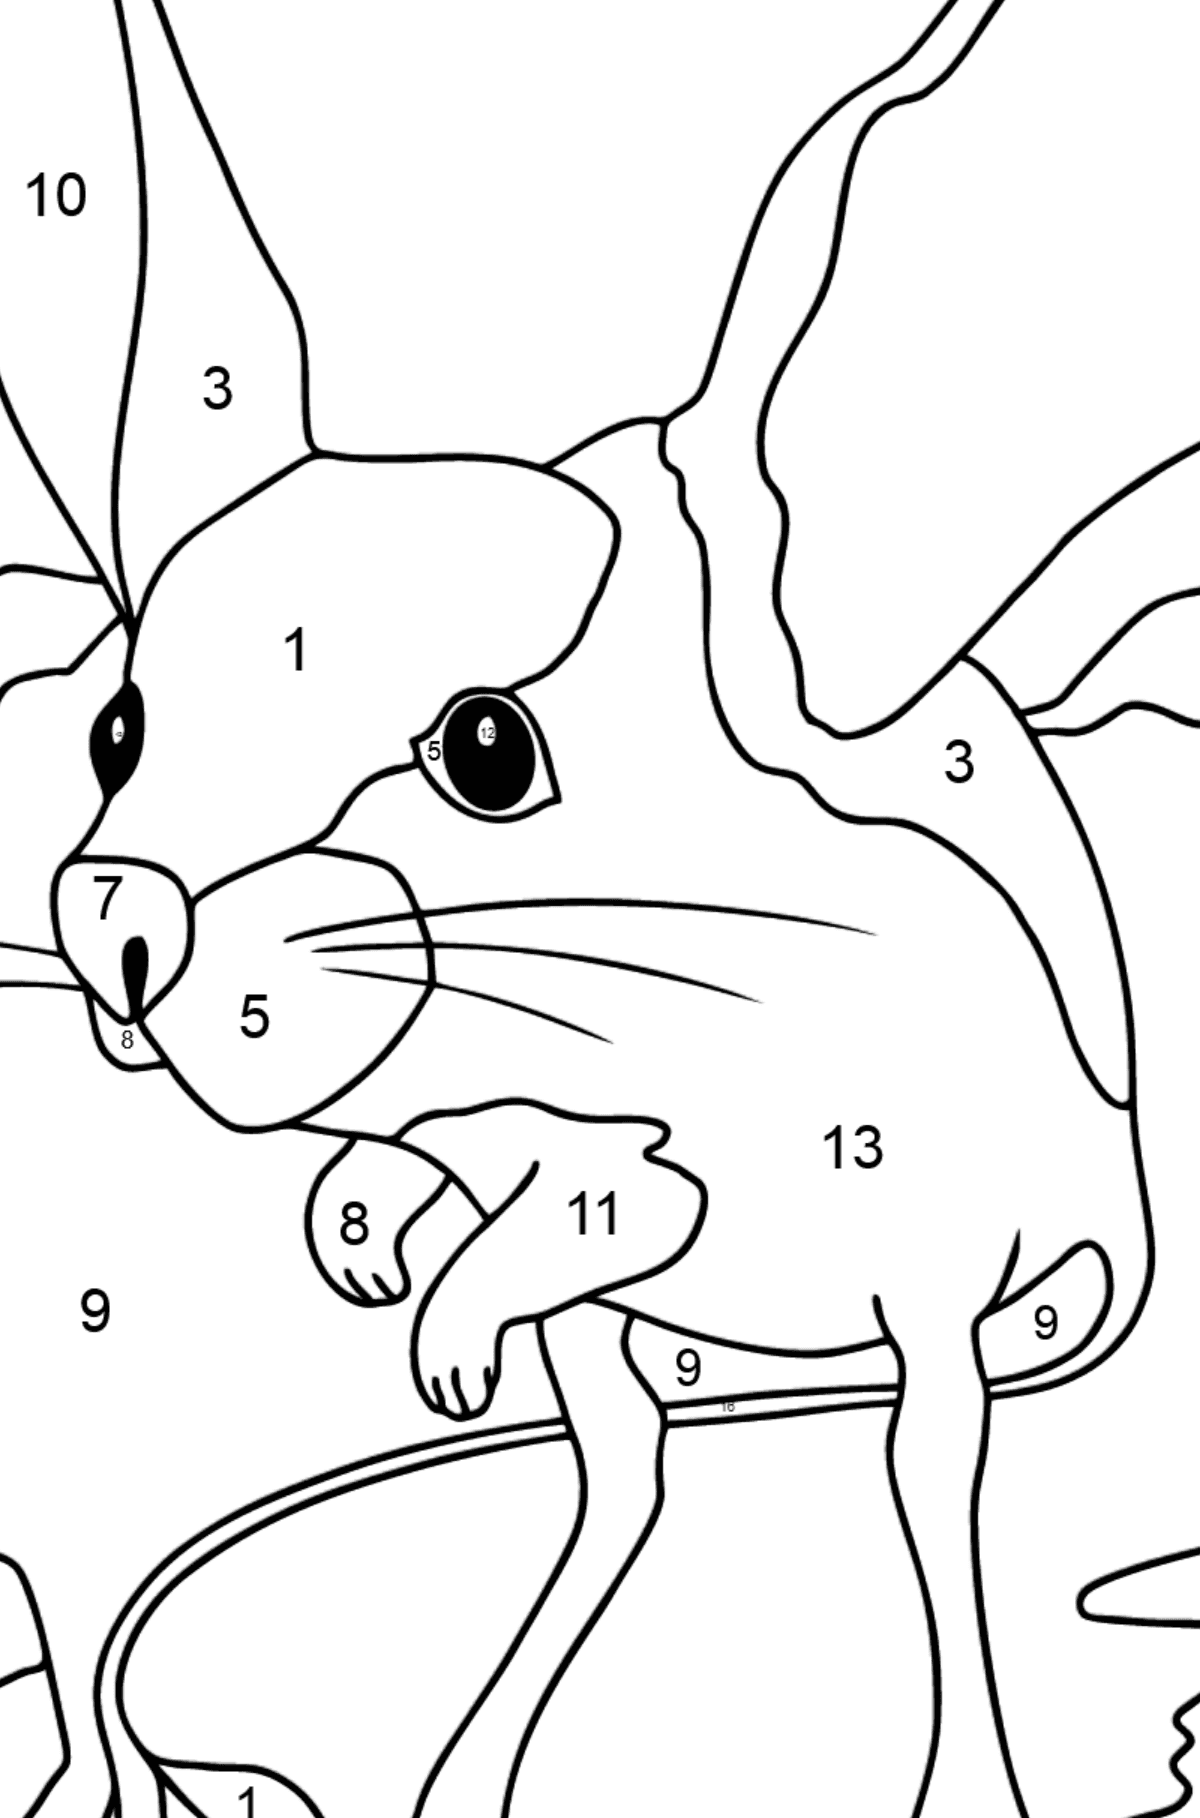 A Jerboa is Inspecting the Area Coloring Page - Coloring by Numbers for Kids